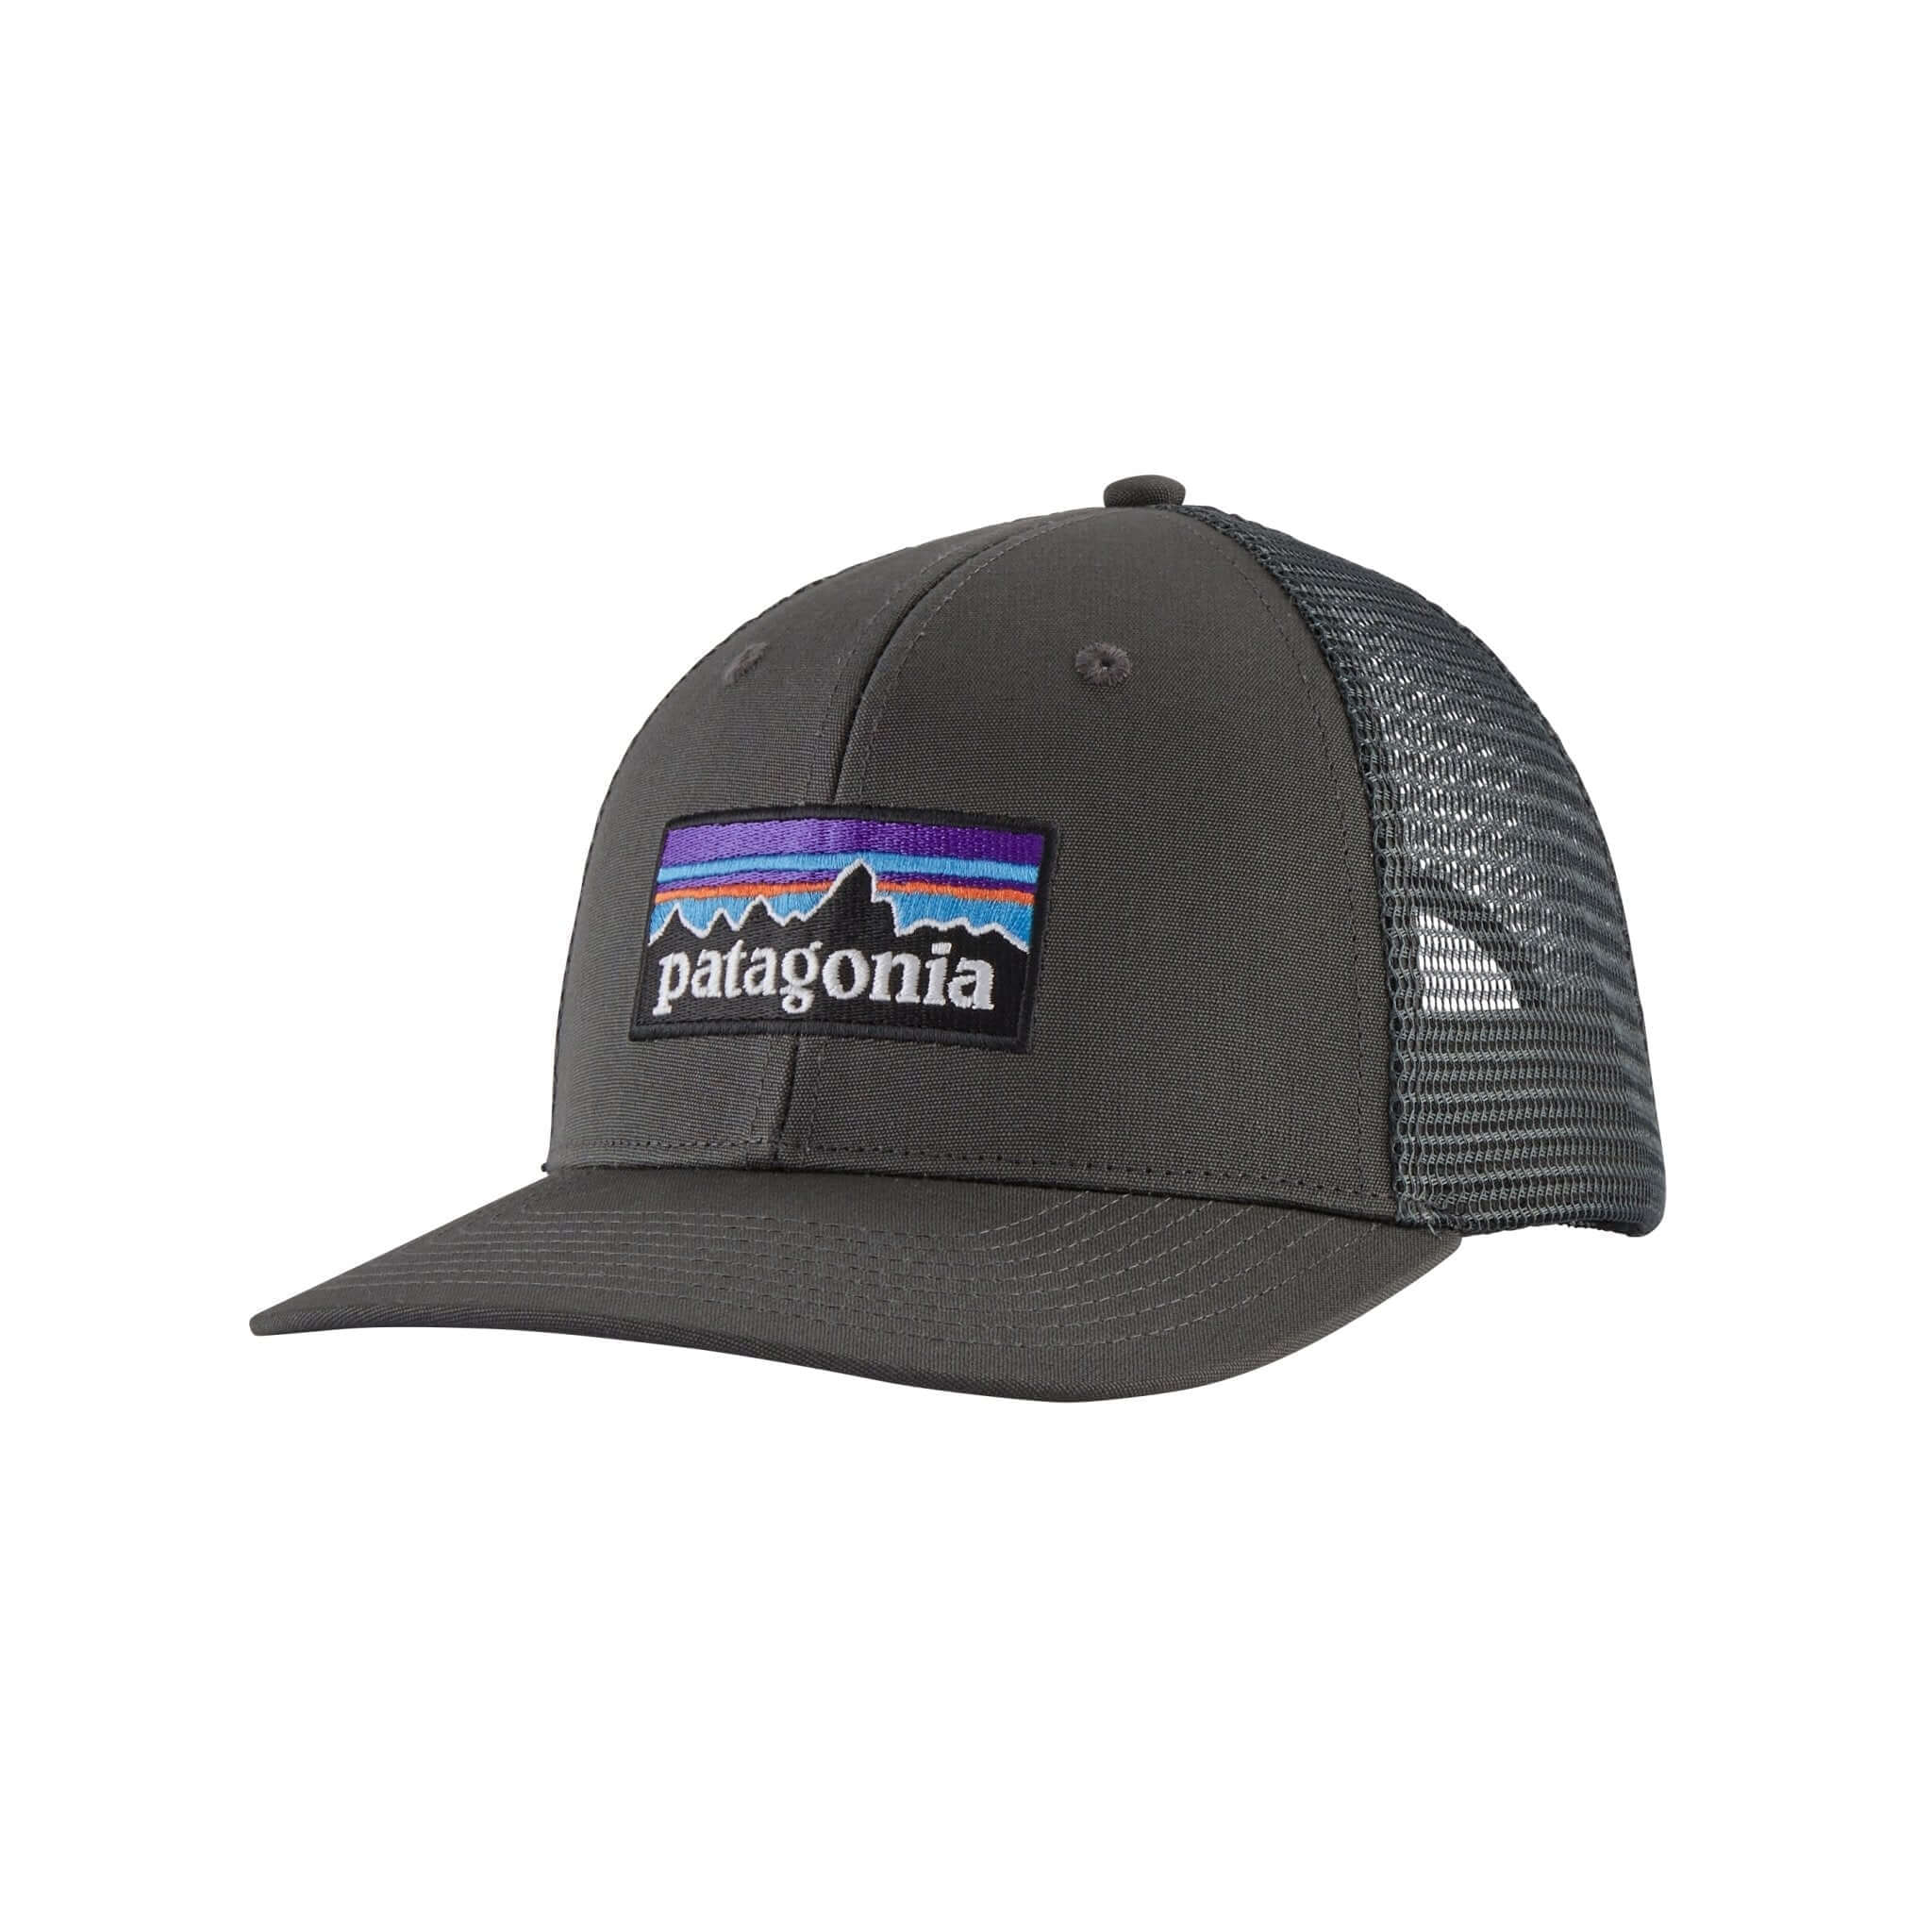 P - 6 Logo Trucker Hat in FORGE GREY | Patagonia Bend